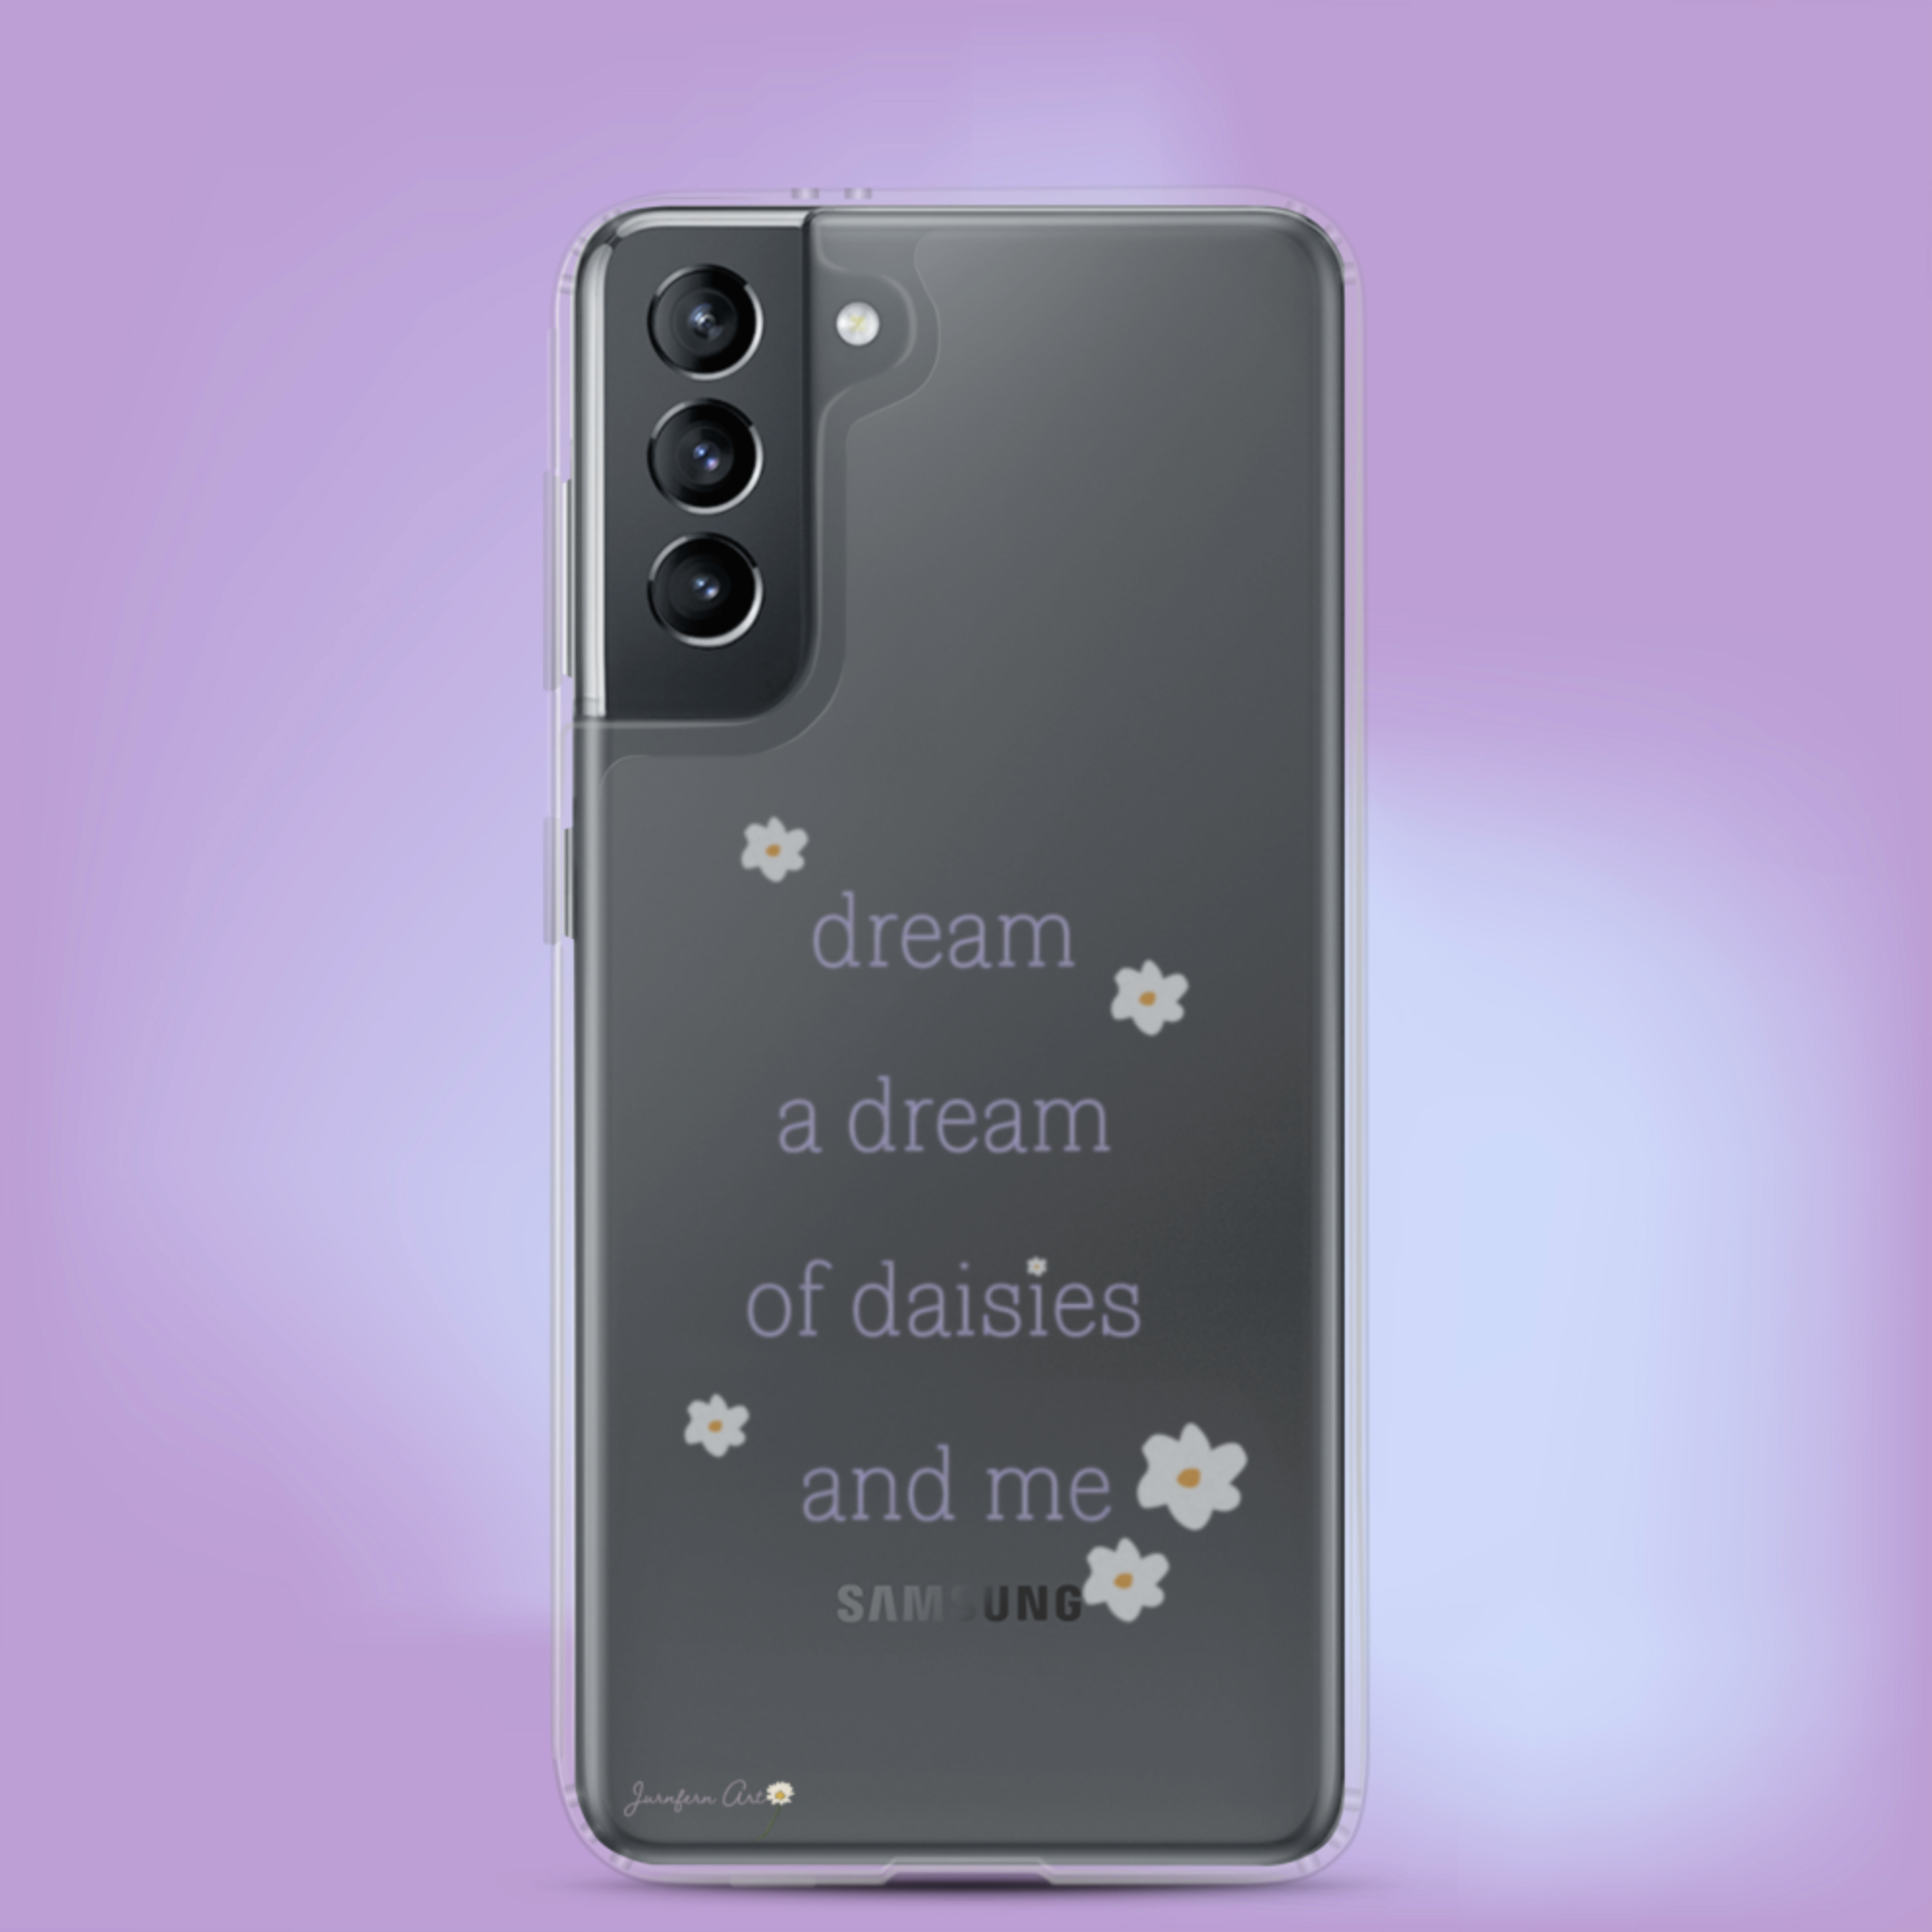 A transparent Samsung Galaxy S21 phone case with lavender text on it that reads "dream a dream of daisies and me" surrounded by small daisies